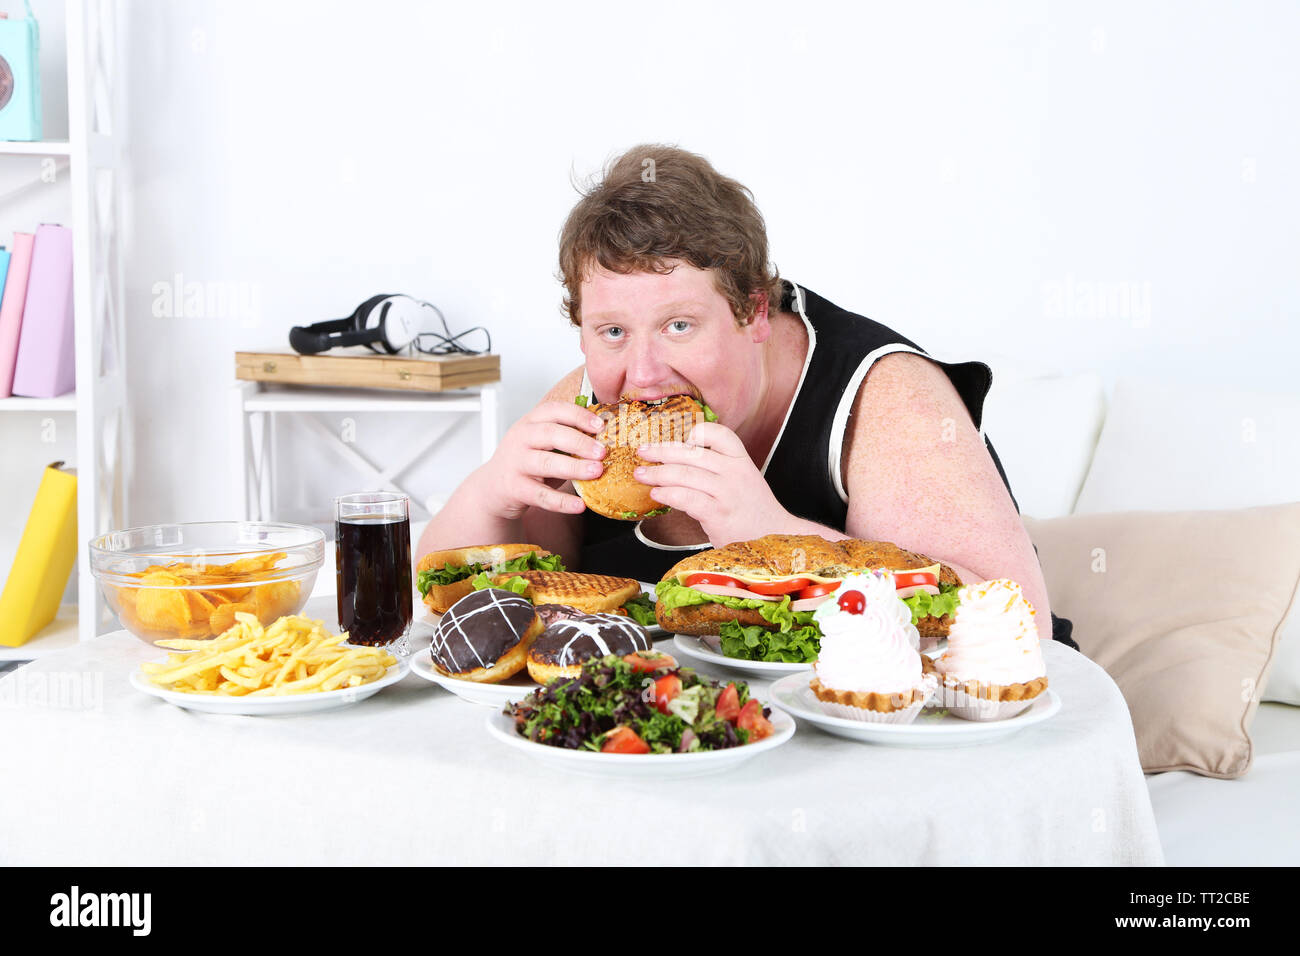 Fat man eating a lot of unhealthy food, on home interior backgro Blank Meme Template